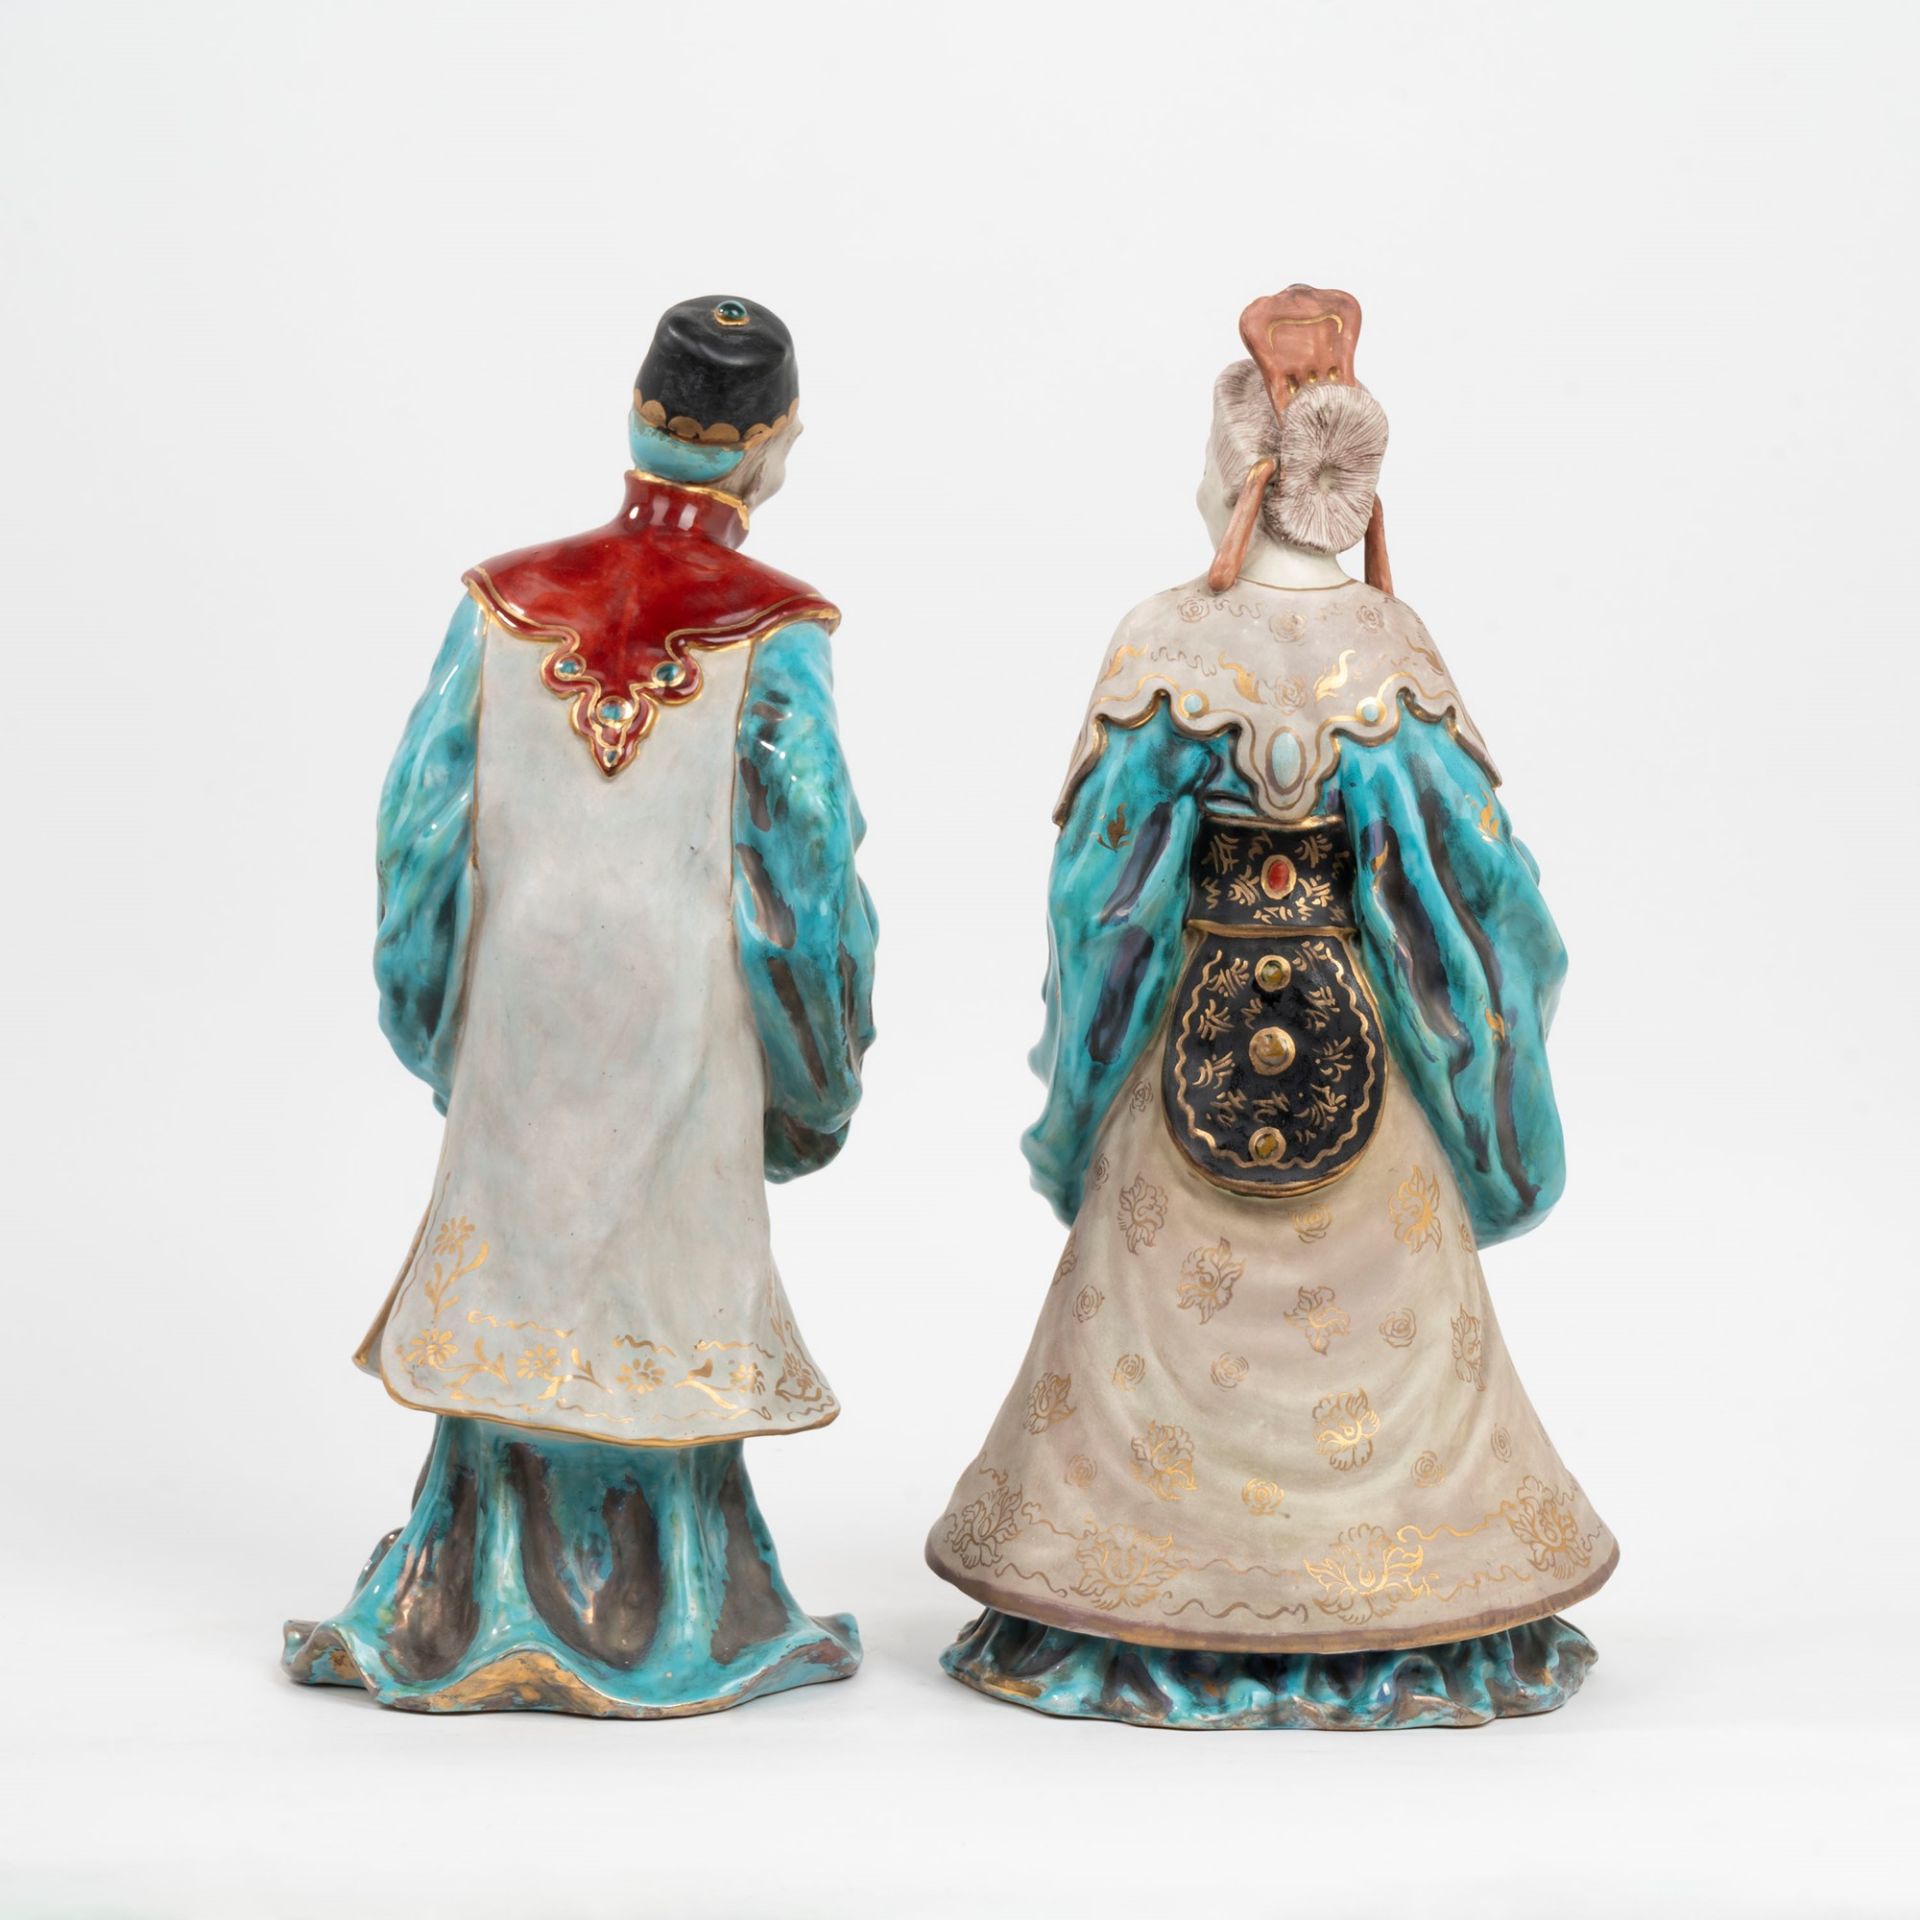 Two polychrome terracotta sculptures depicting an oriental couple, - Image 2 of 5